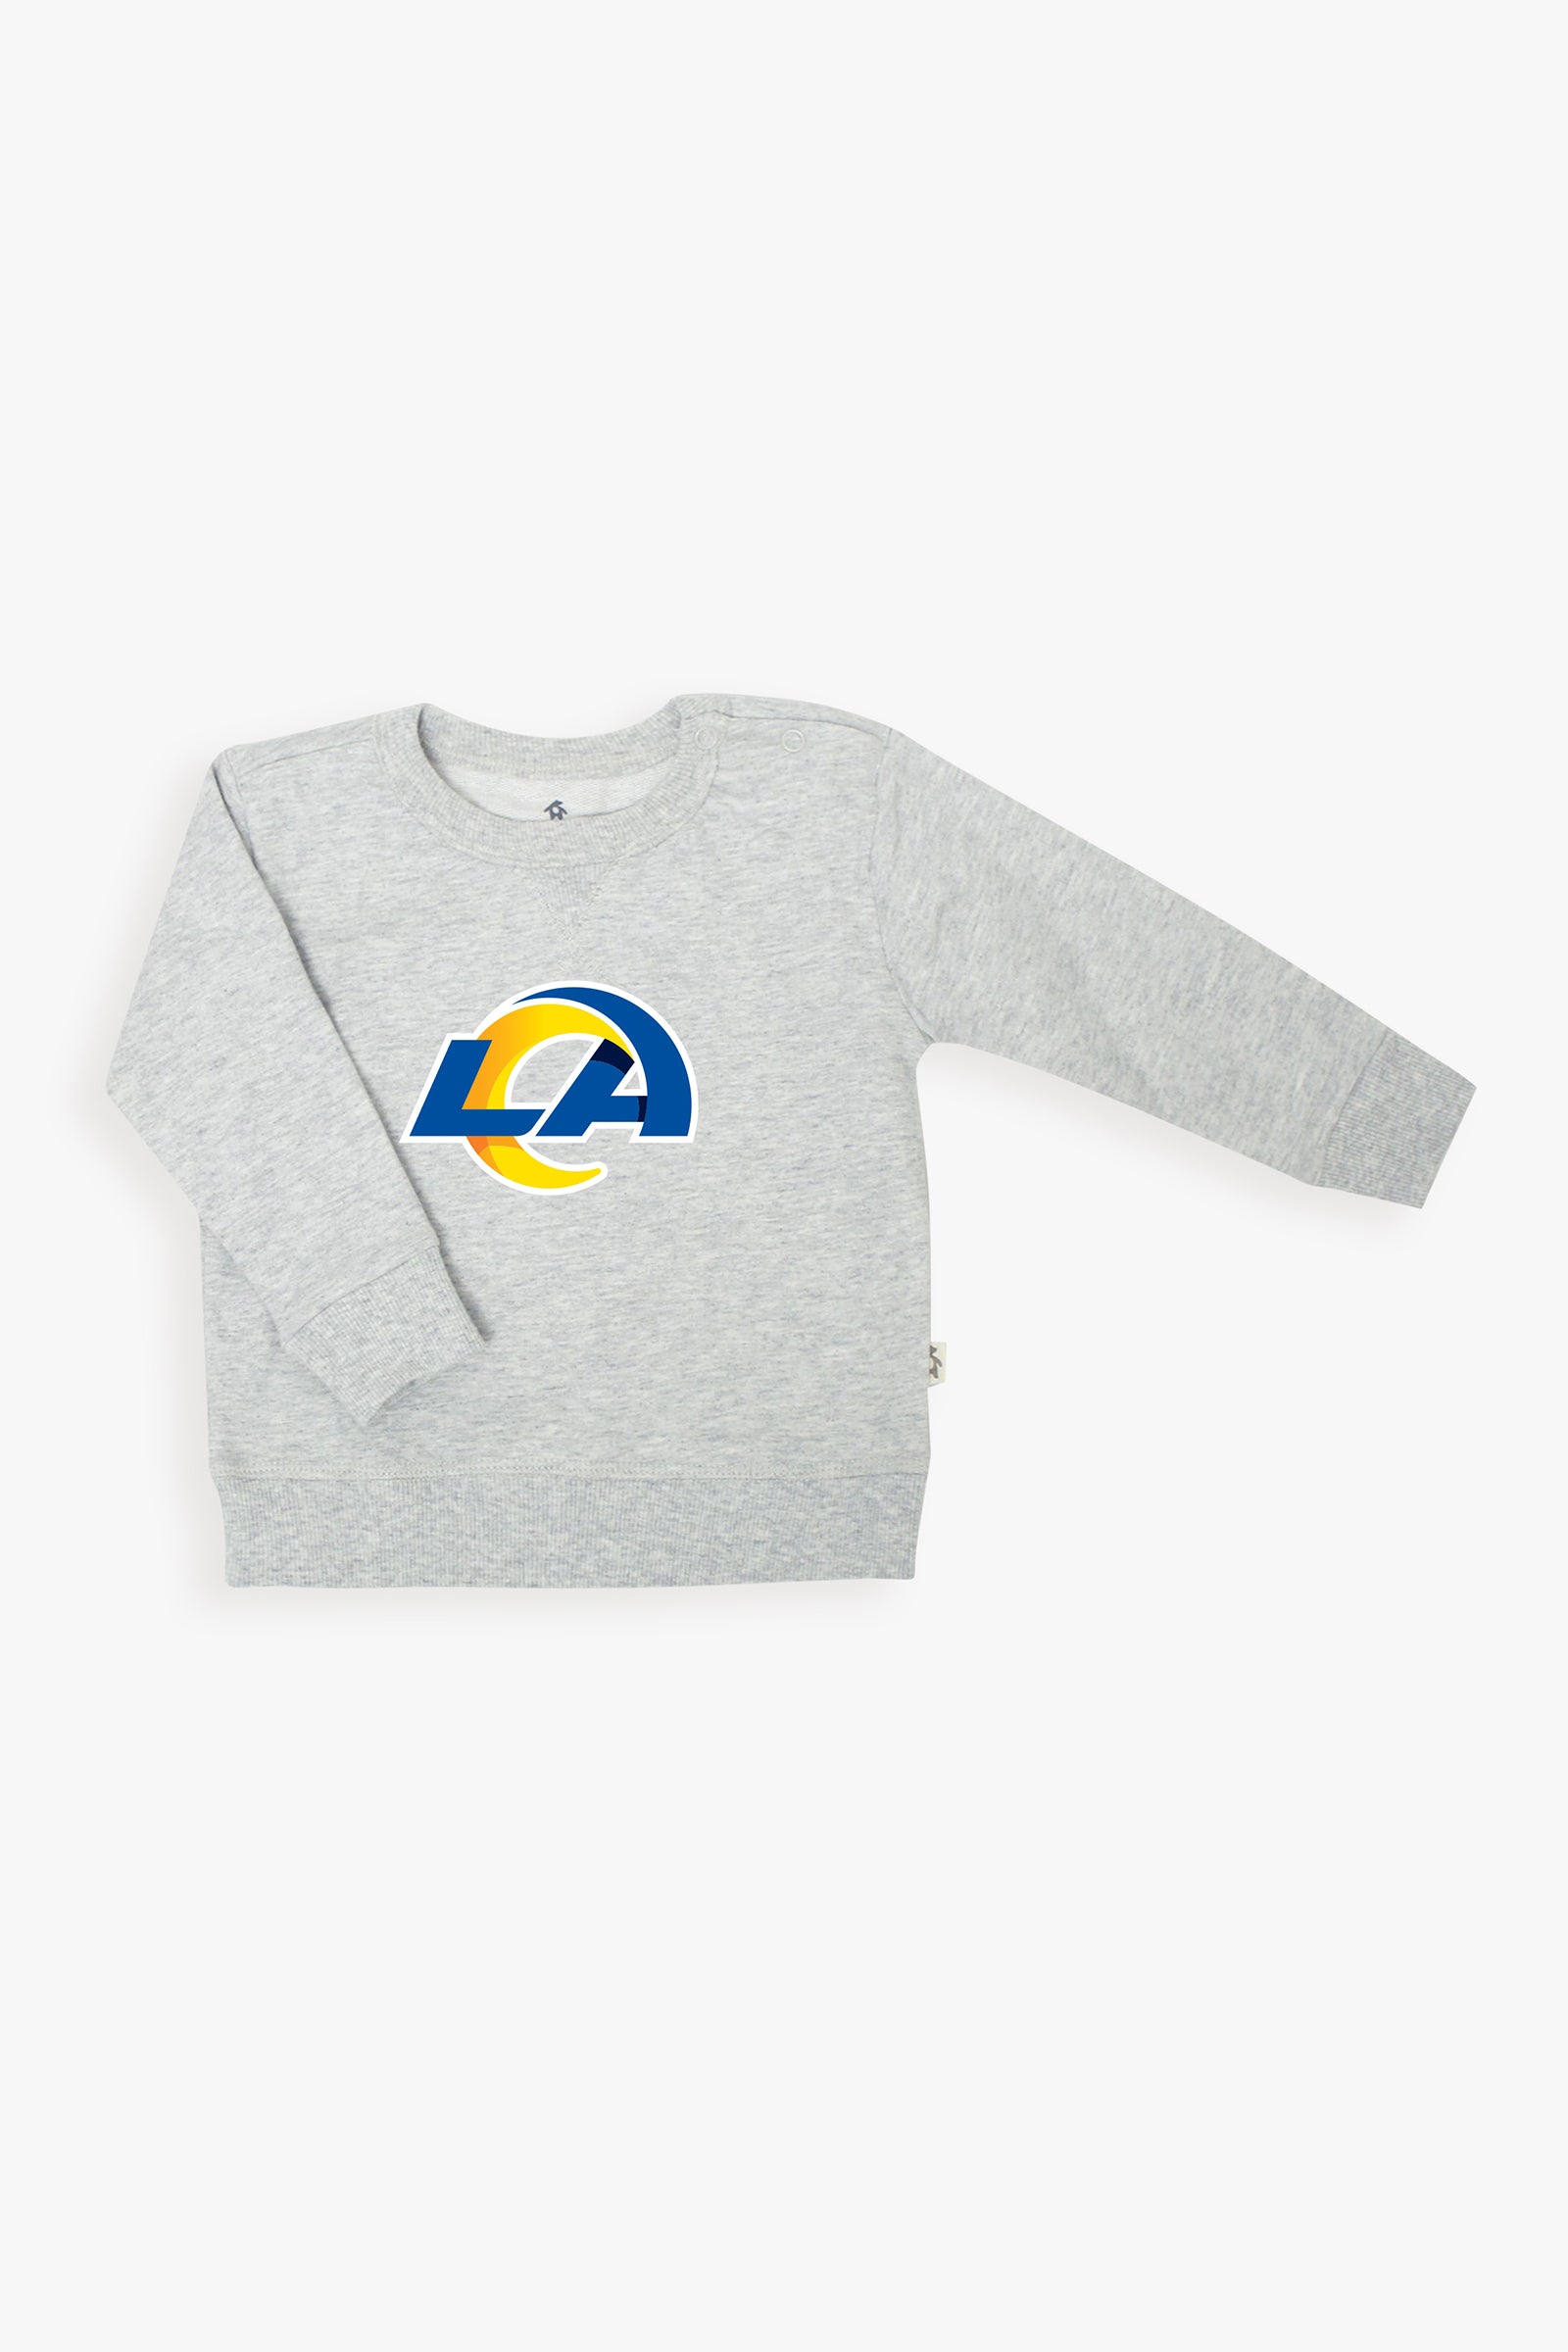 Gertex NFL Baby French Terry Crewneck Sweater in Grey